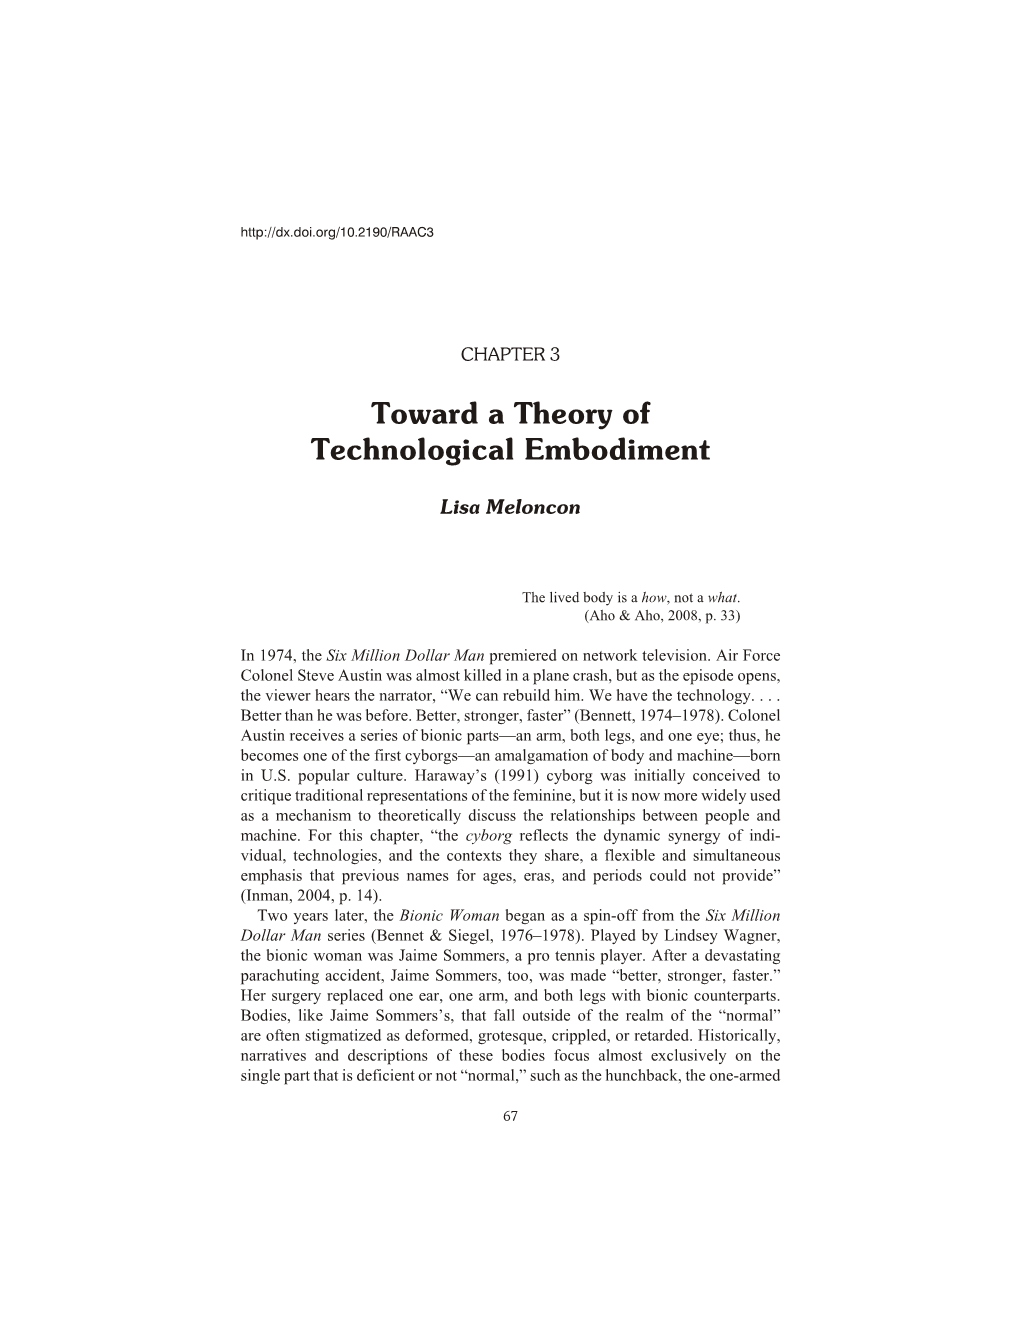 Toward a Theory of Technological Embodiment